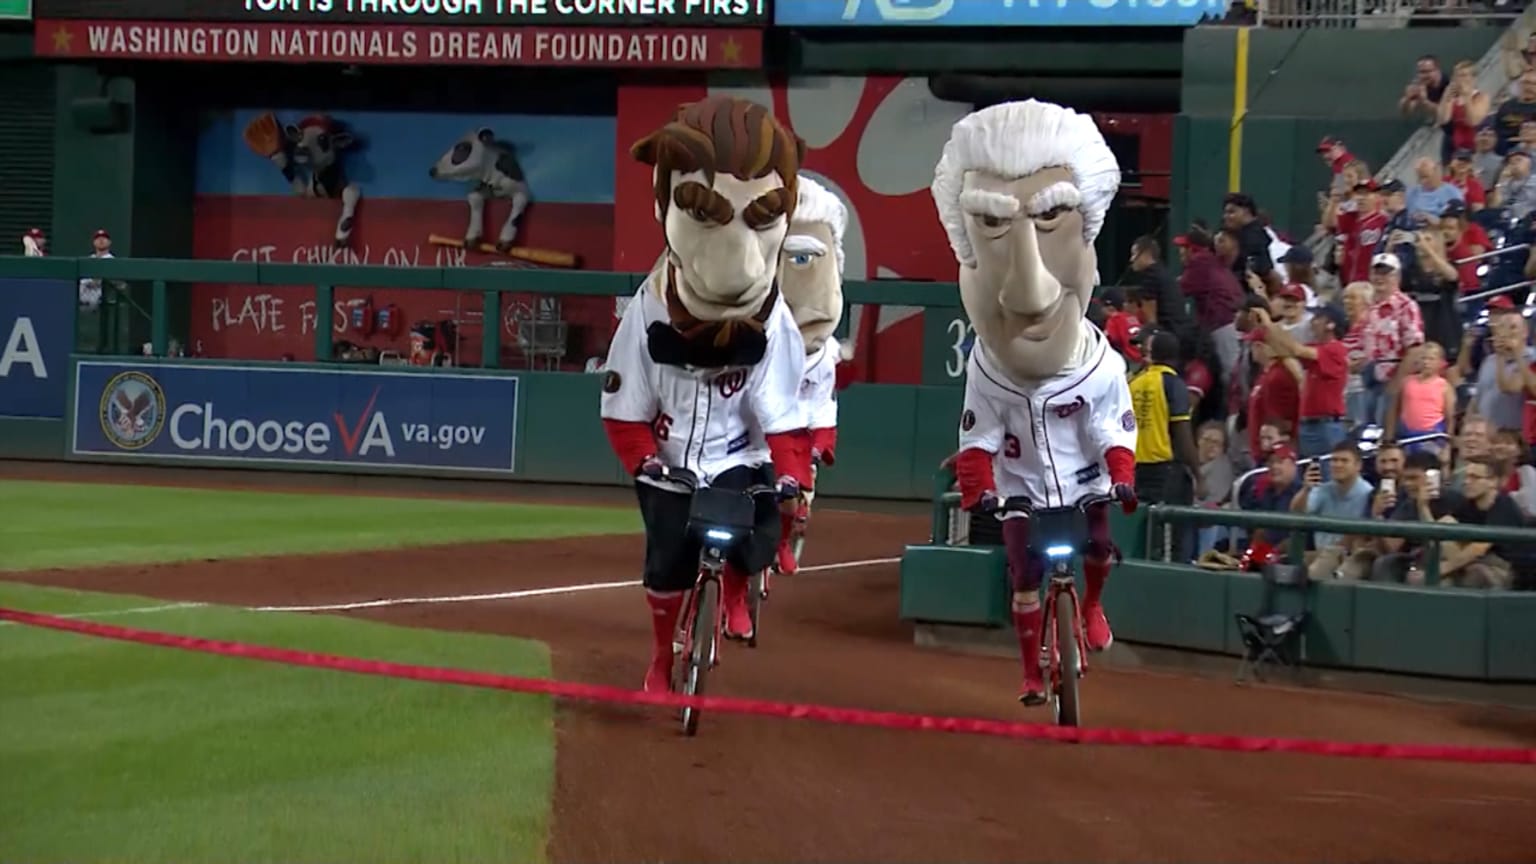 Nationals are holding a Racing Presidents tryout, and you have to